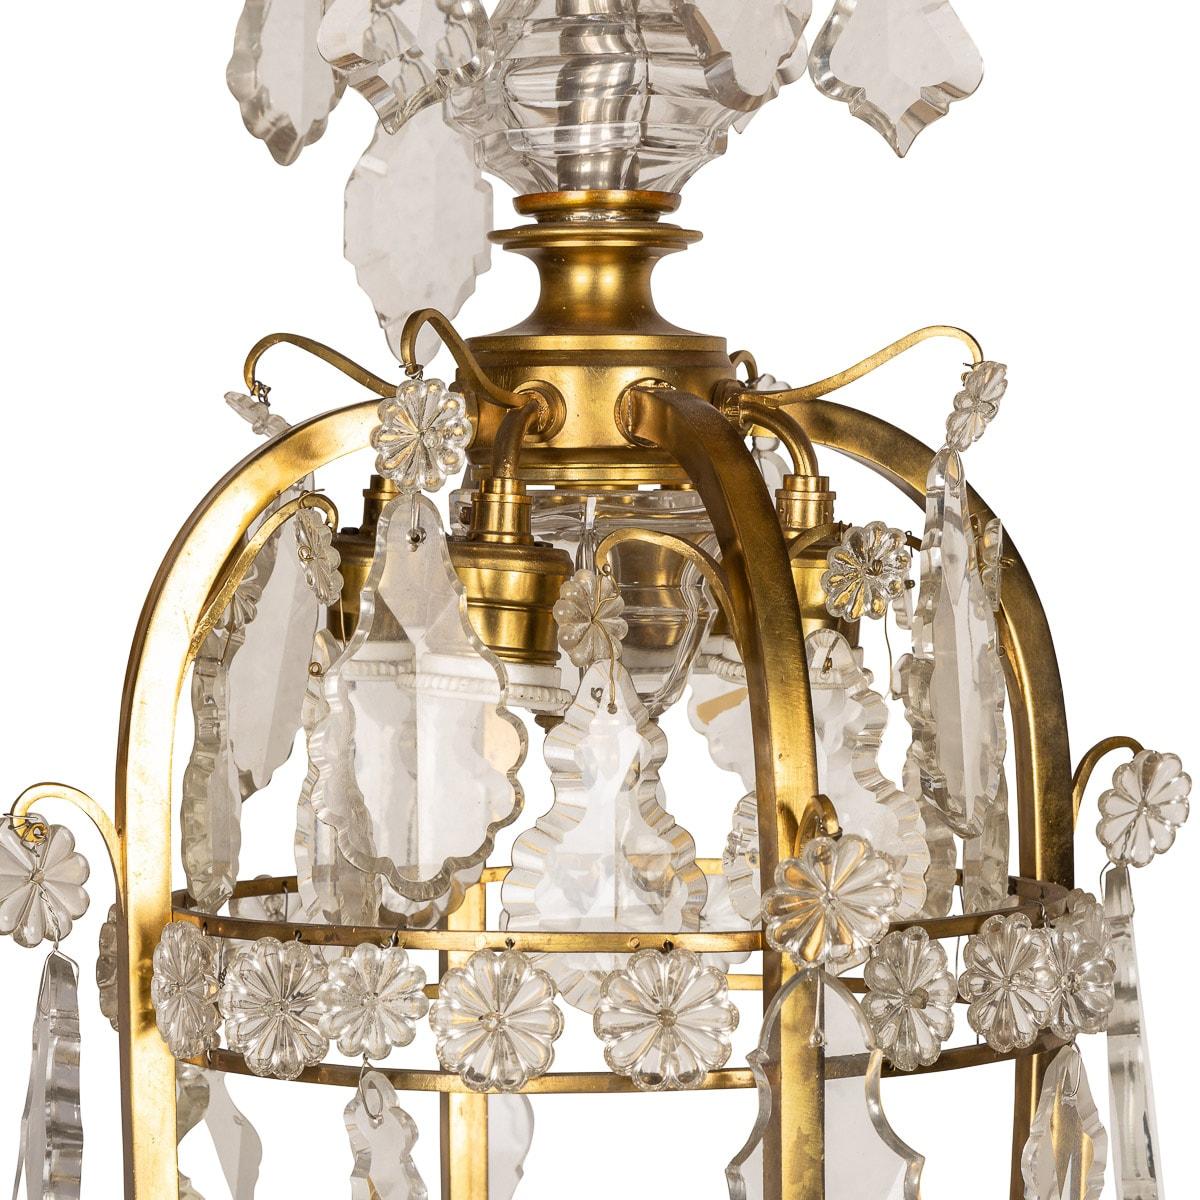 19th Century French Ormolu & Cut Crystal Chandelier, c.1860 In Good Condition For Sale In Royal Tunbridge Wells, Kent